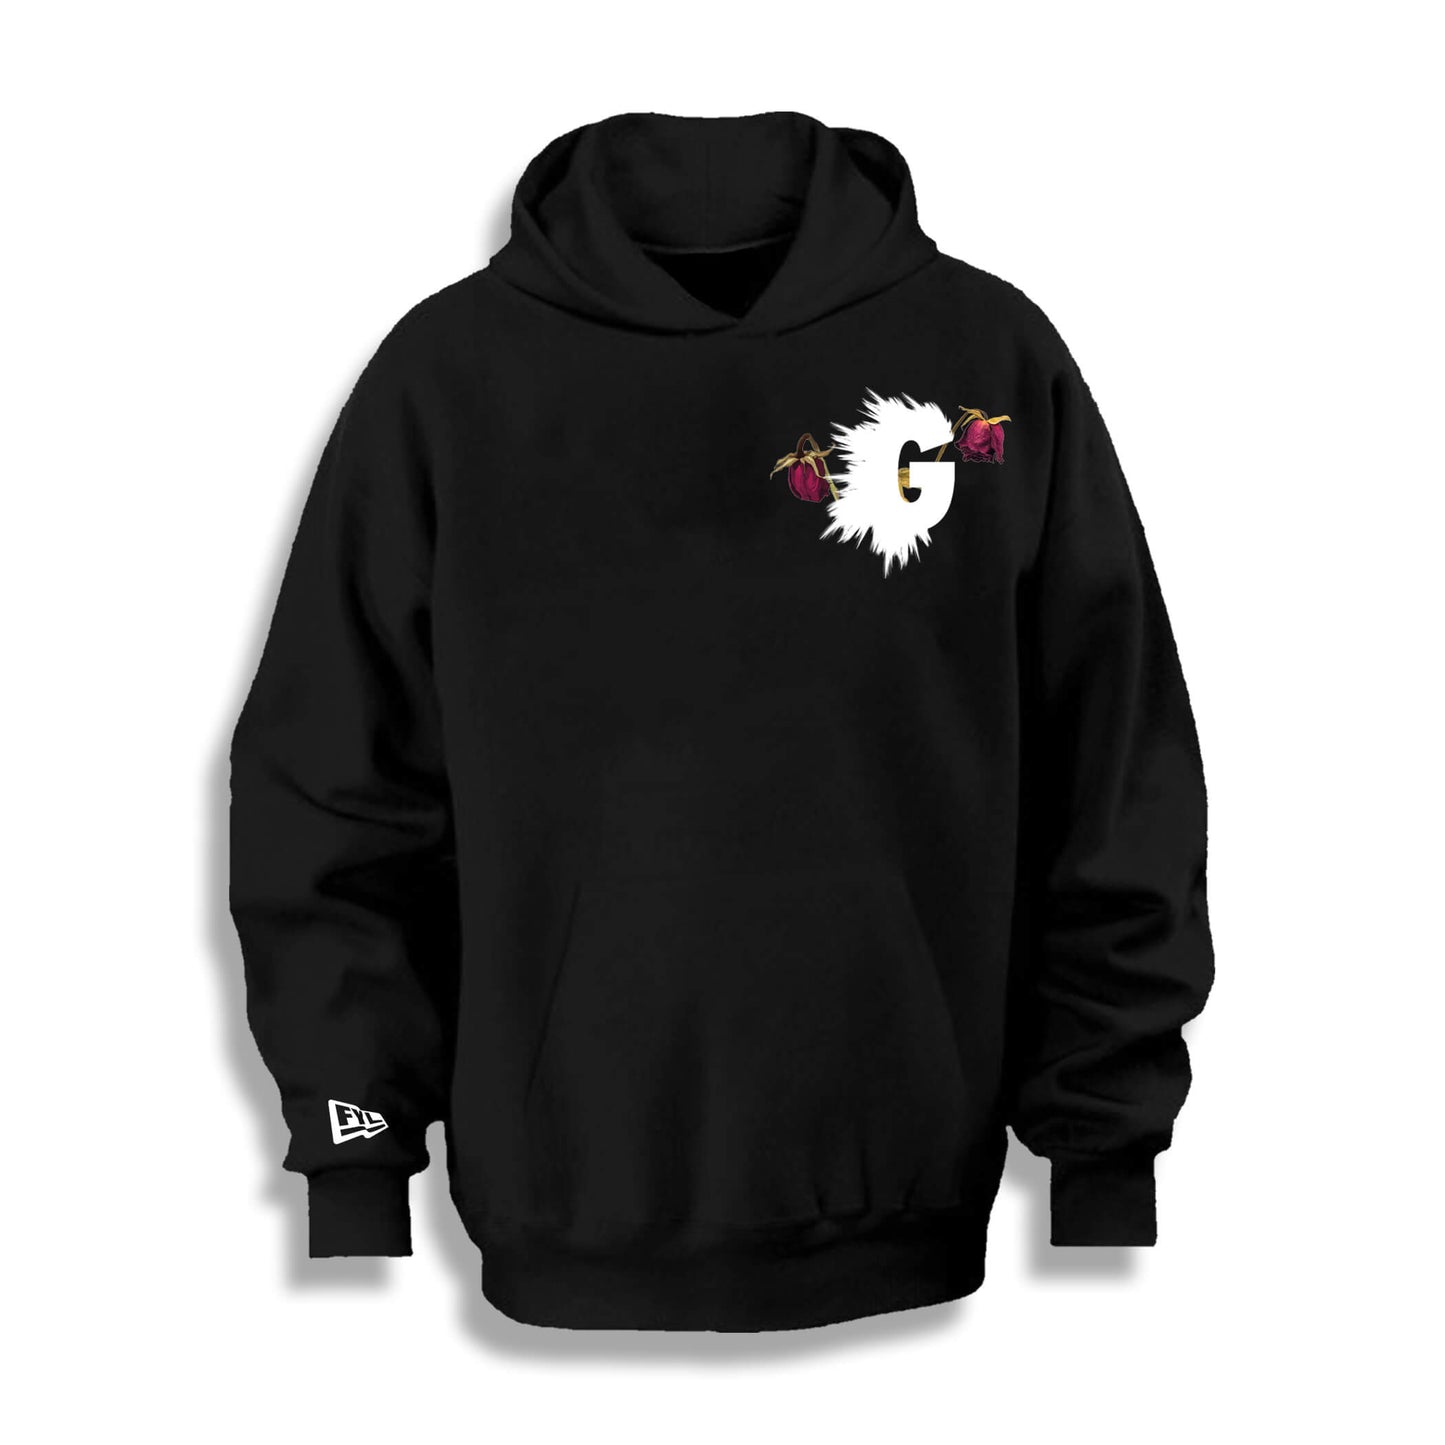 WAR OF THE ROSES (DEAD OR ALIVE) HOODY